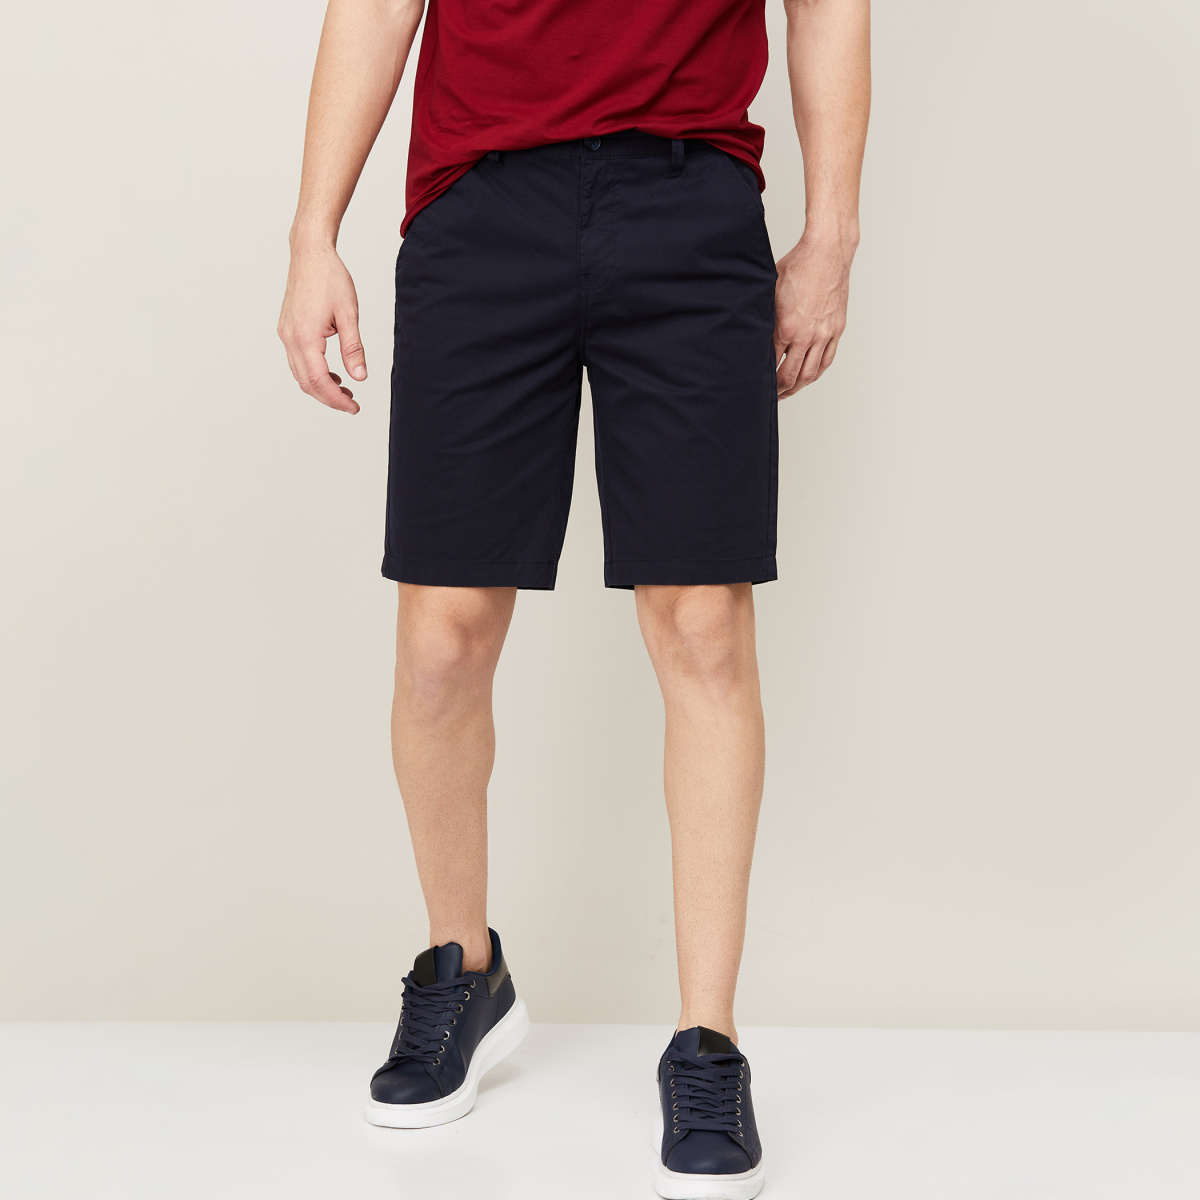 UNITED COLORS OF BENETTON Men Solid Shorts